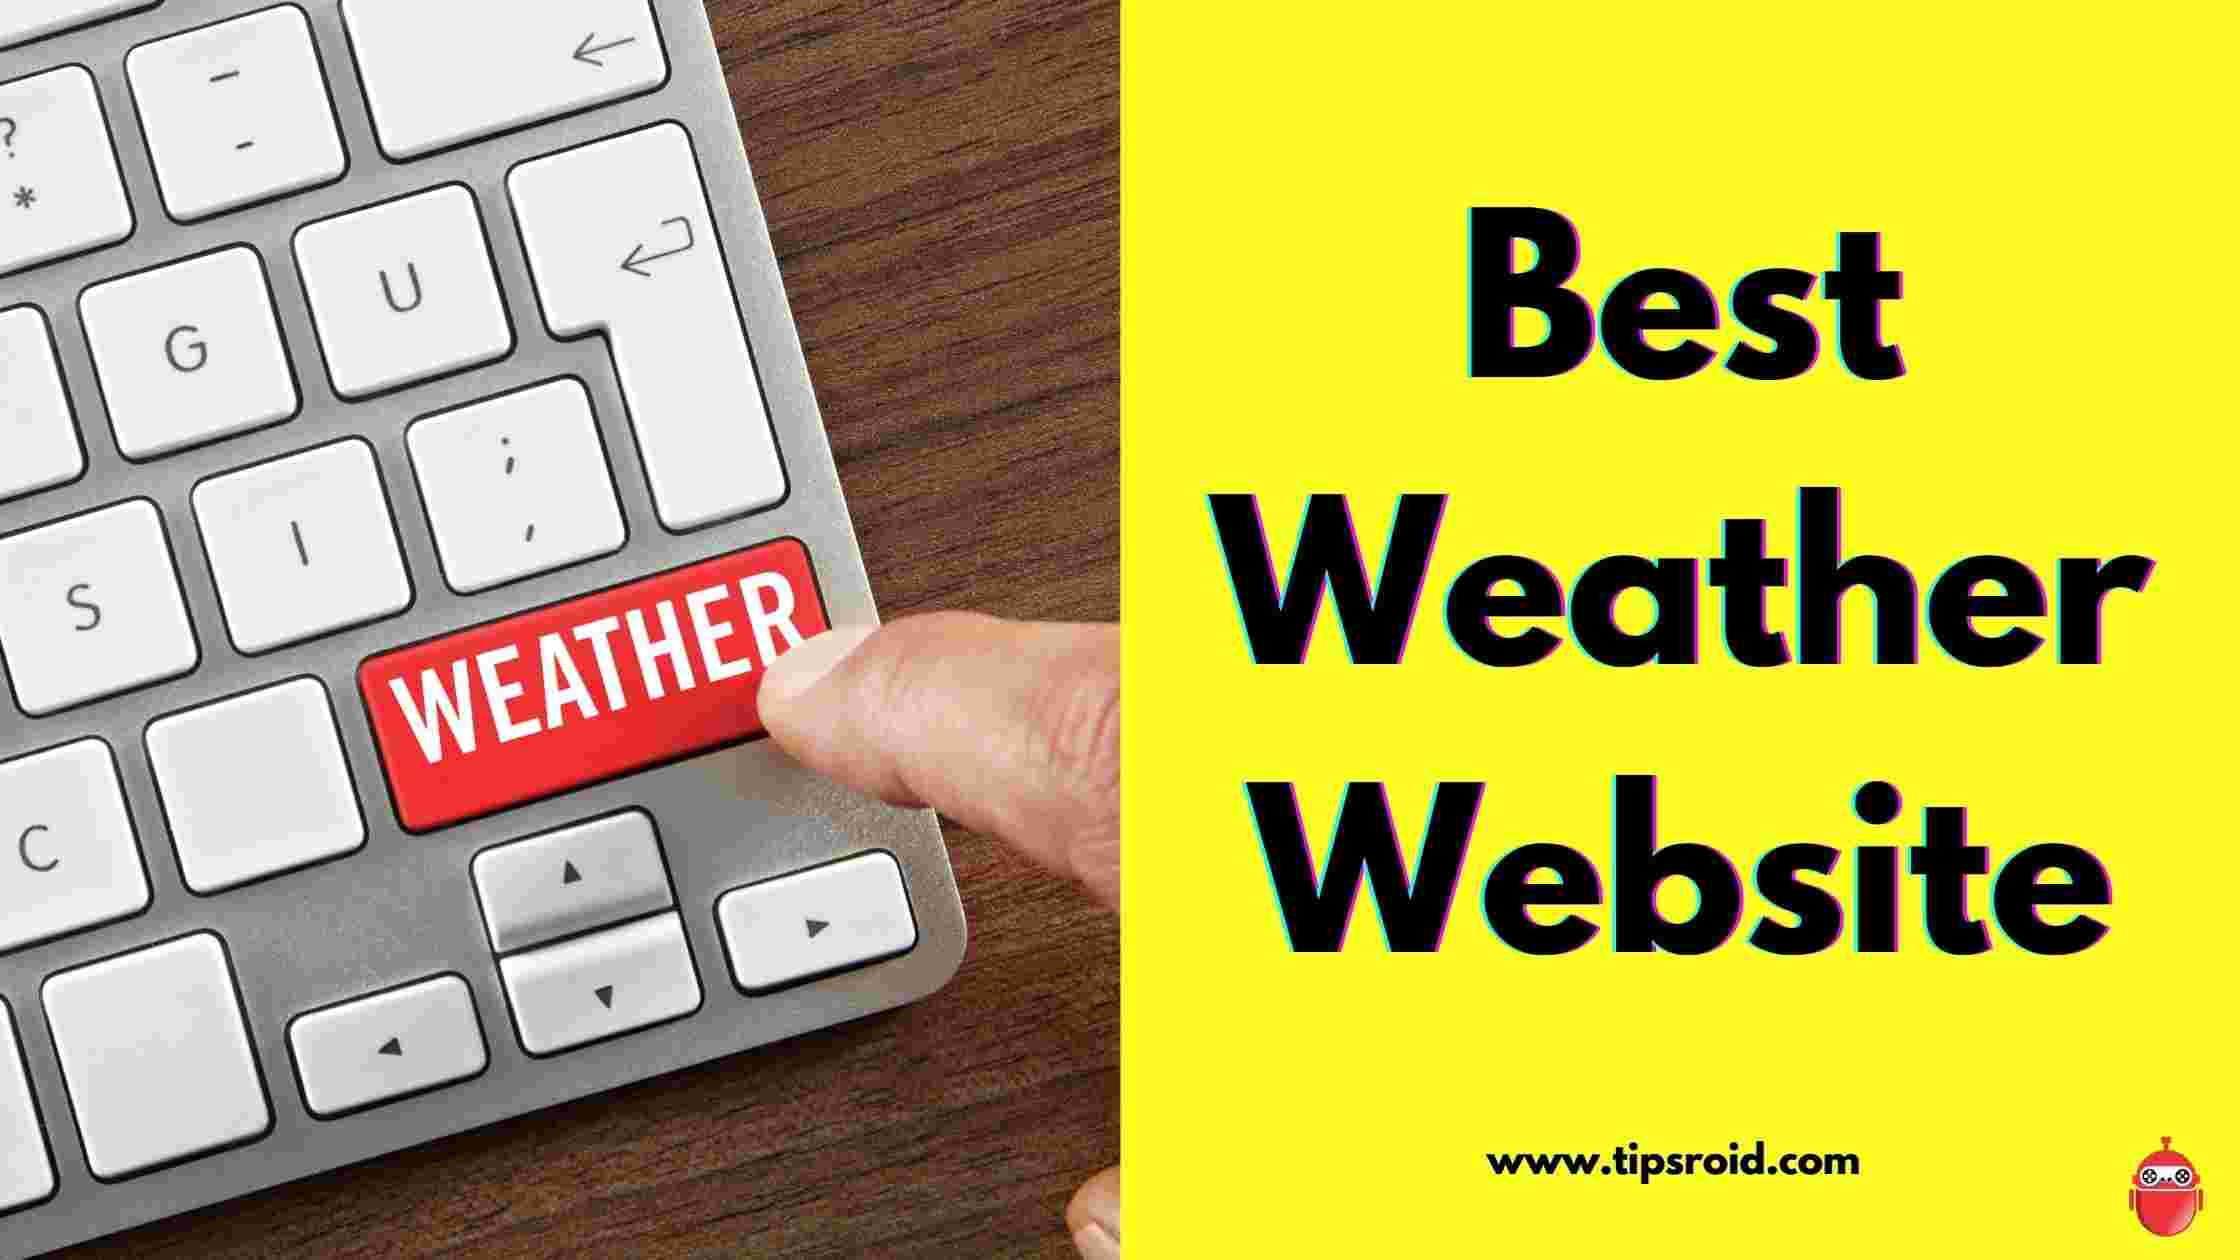 10 Best Weather Website For Accurate Forecast 2022